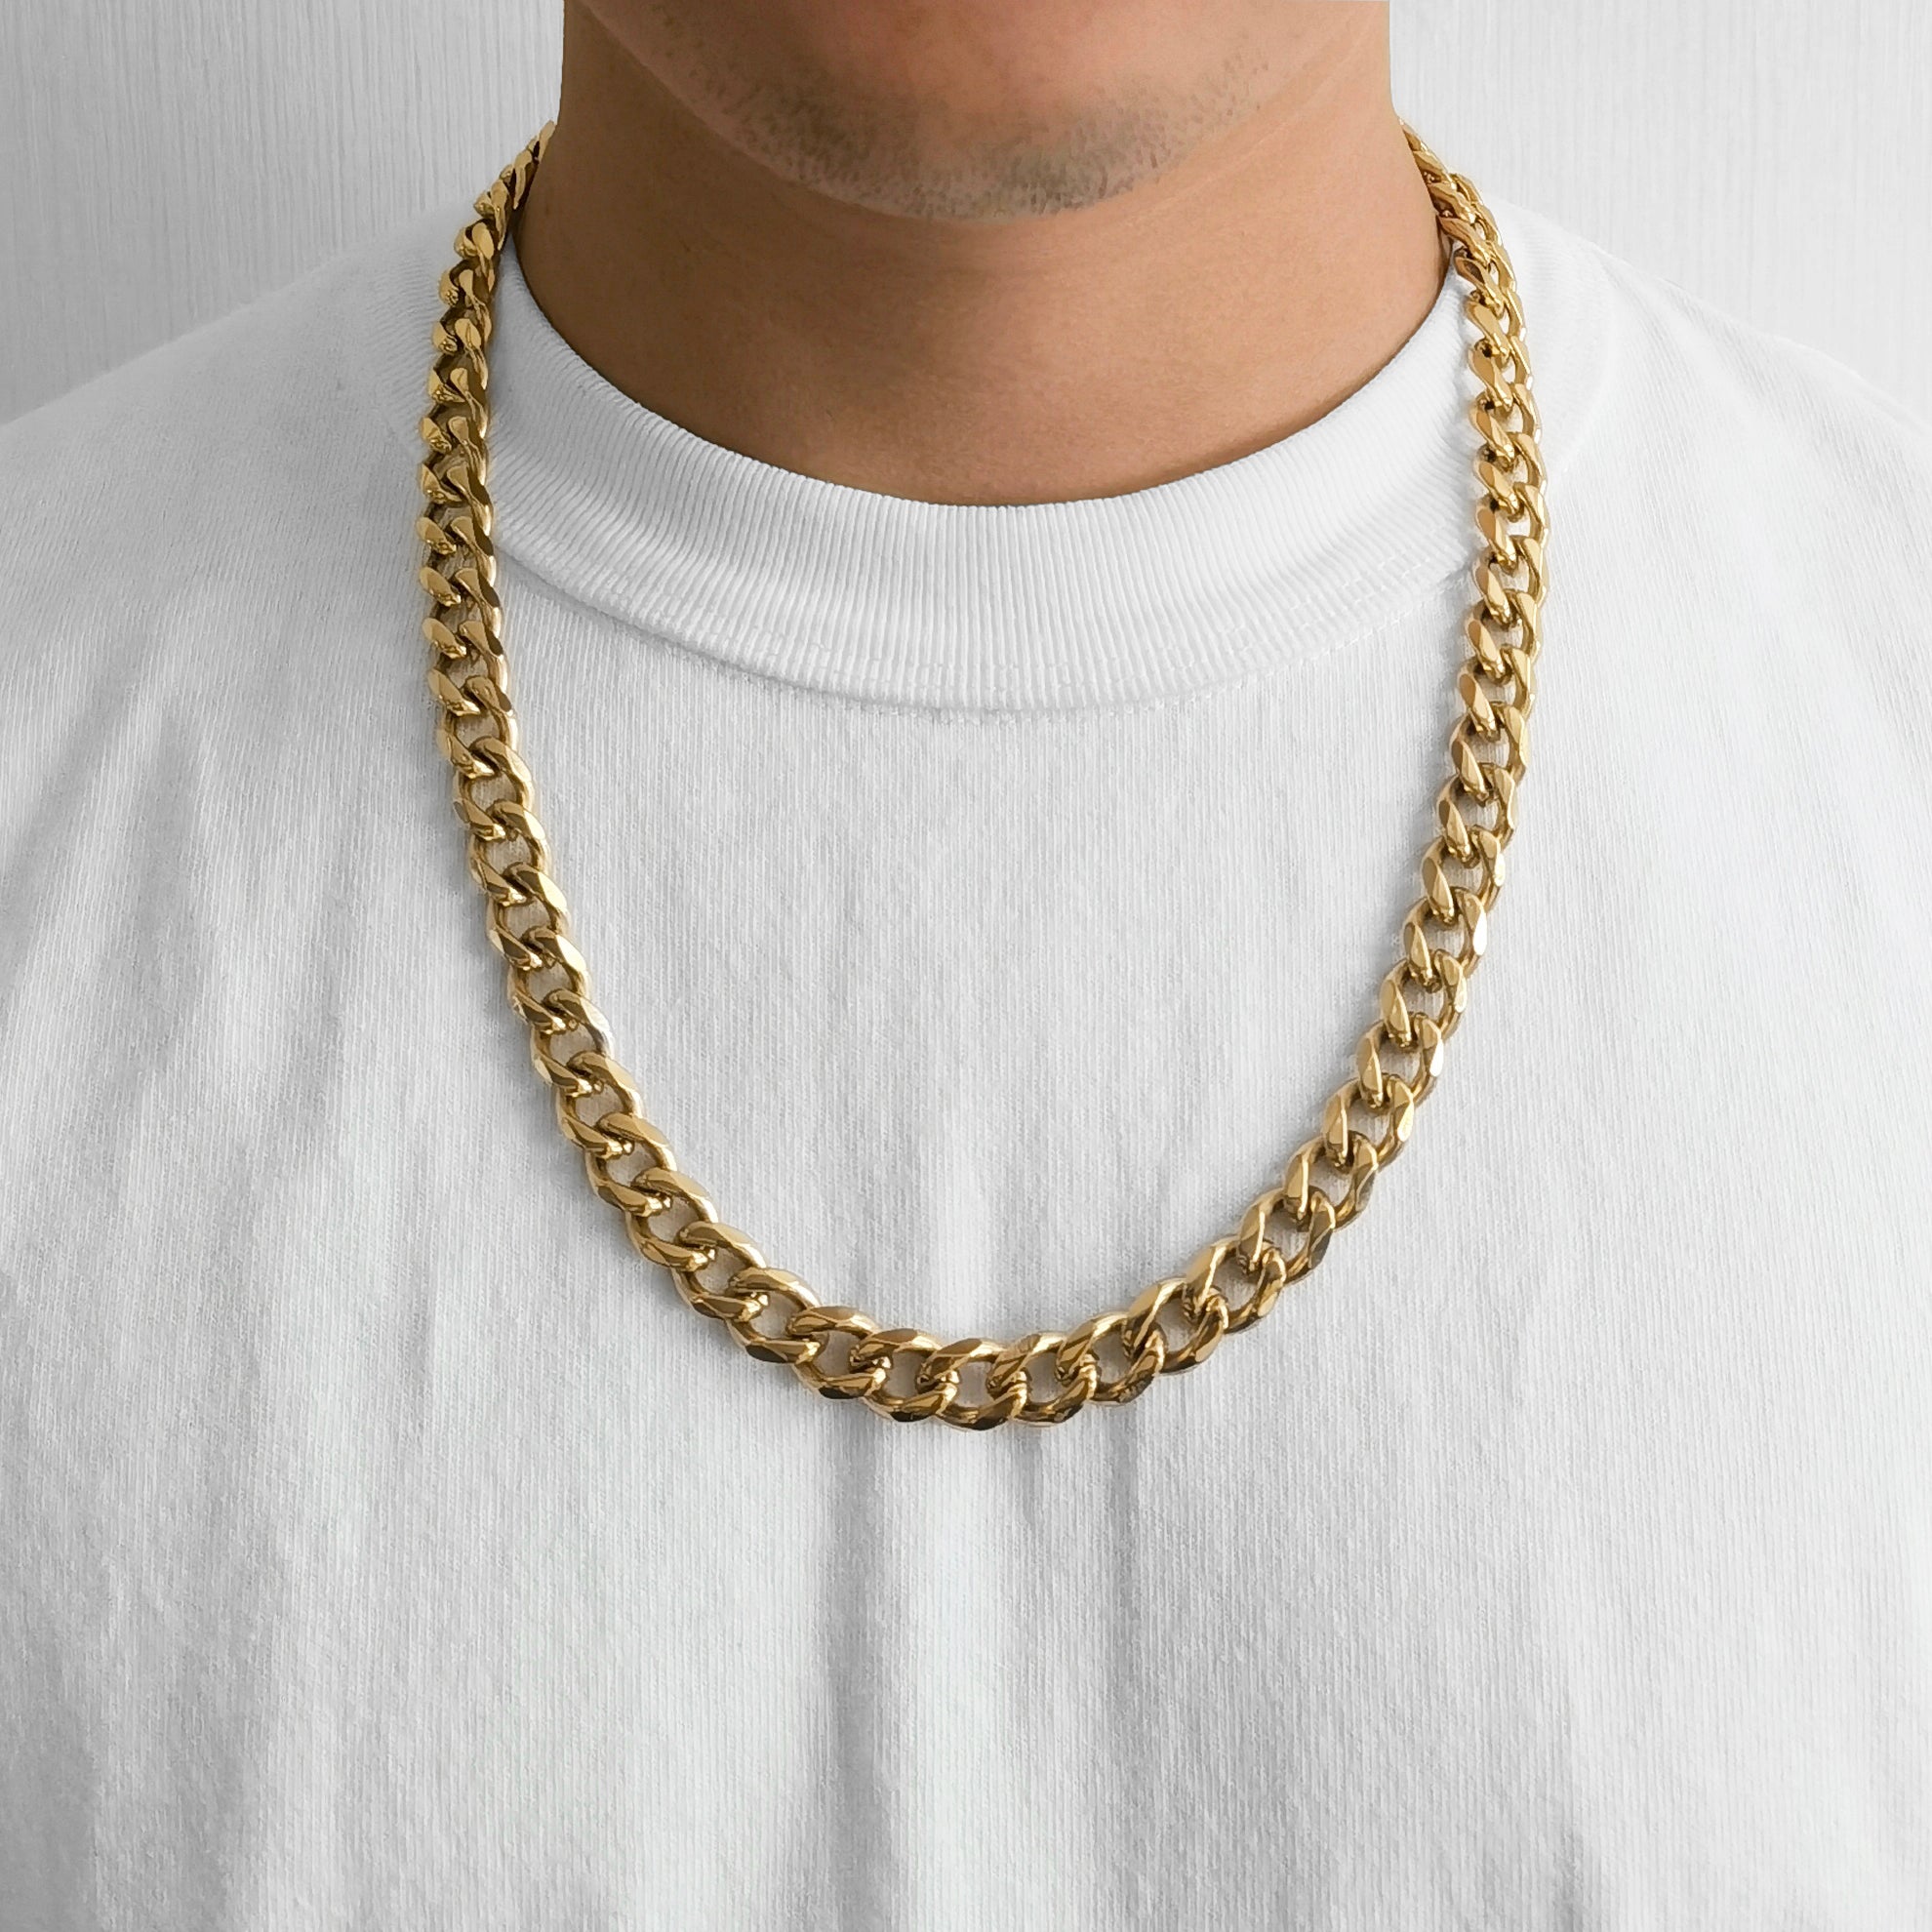 Men's 12mm Gold Plated Steel 18-24 Inch Curb Chain Necklace